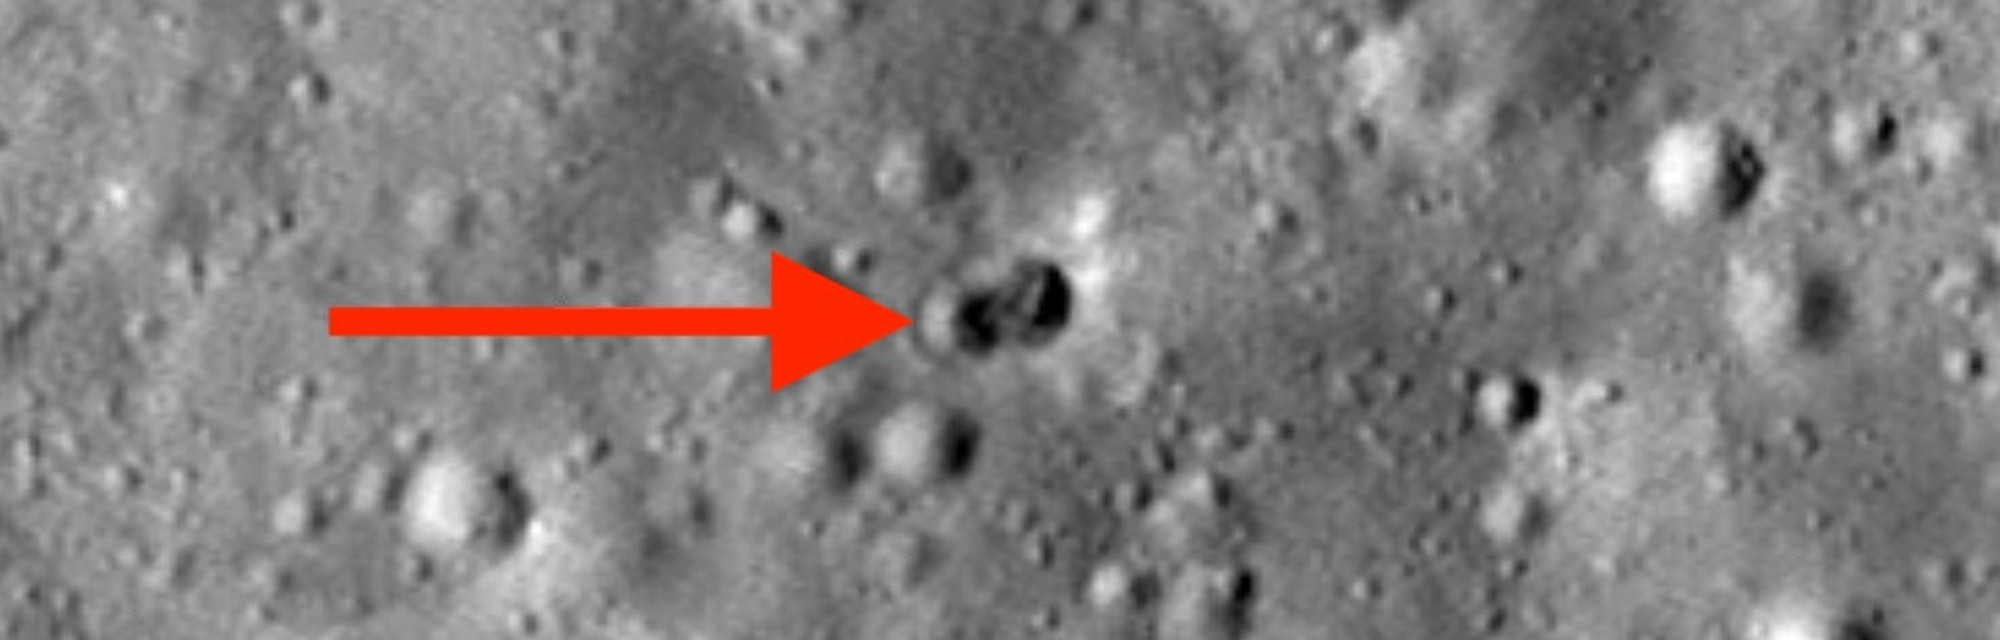 Crater image with a red arrow pointing at the site of a rocket booster crash